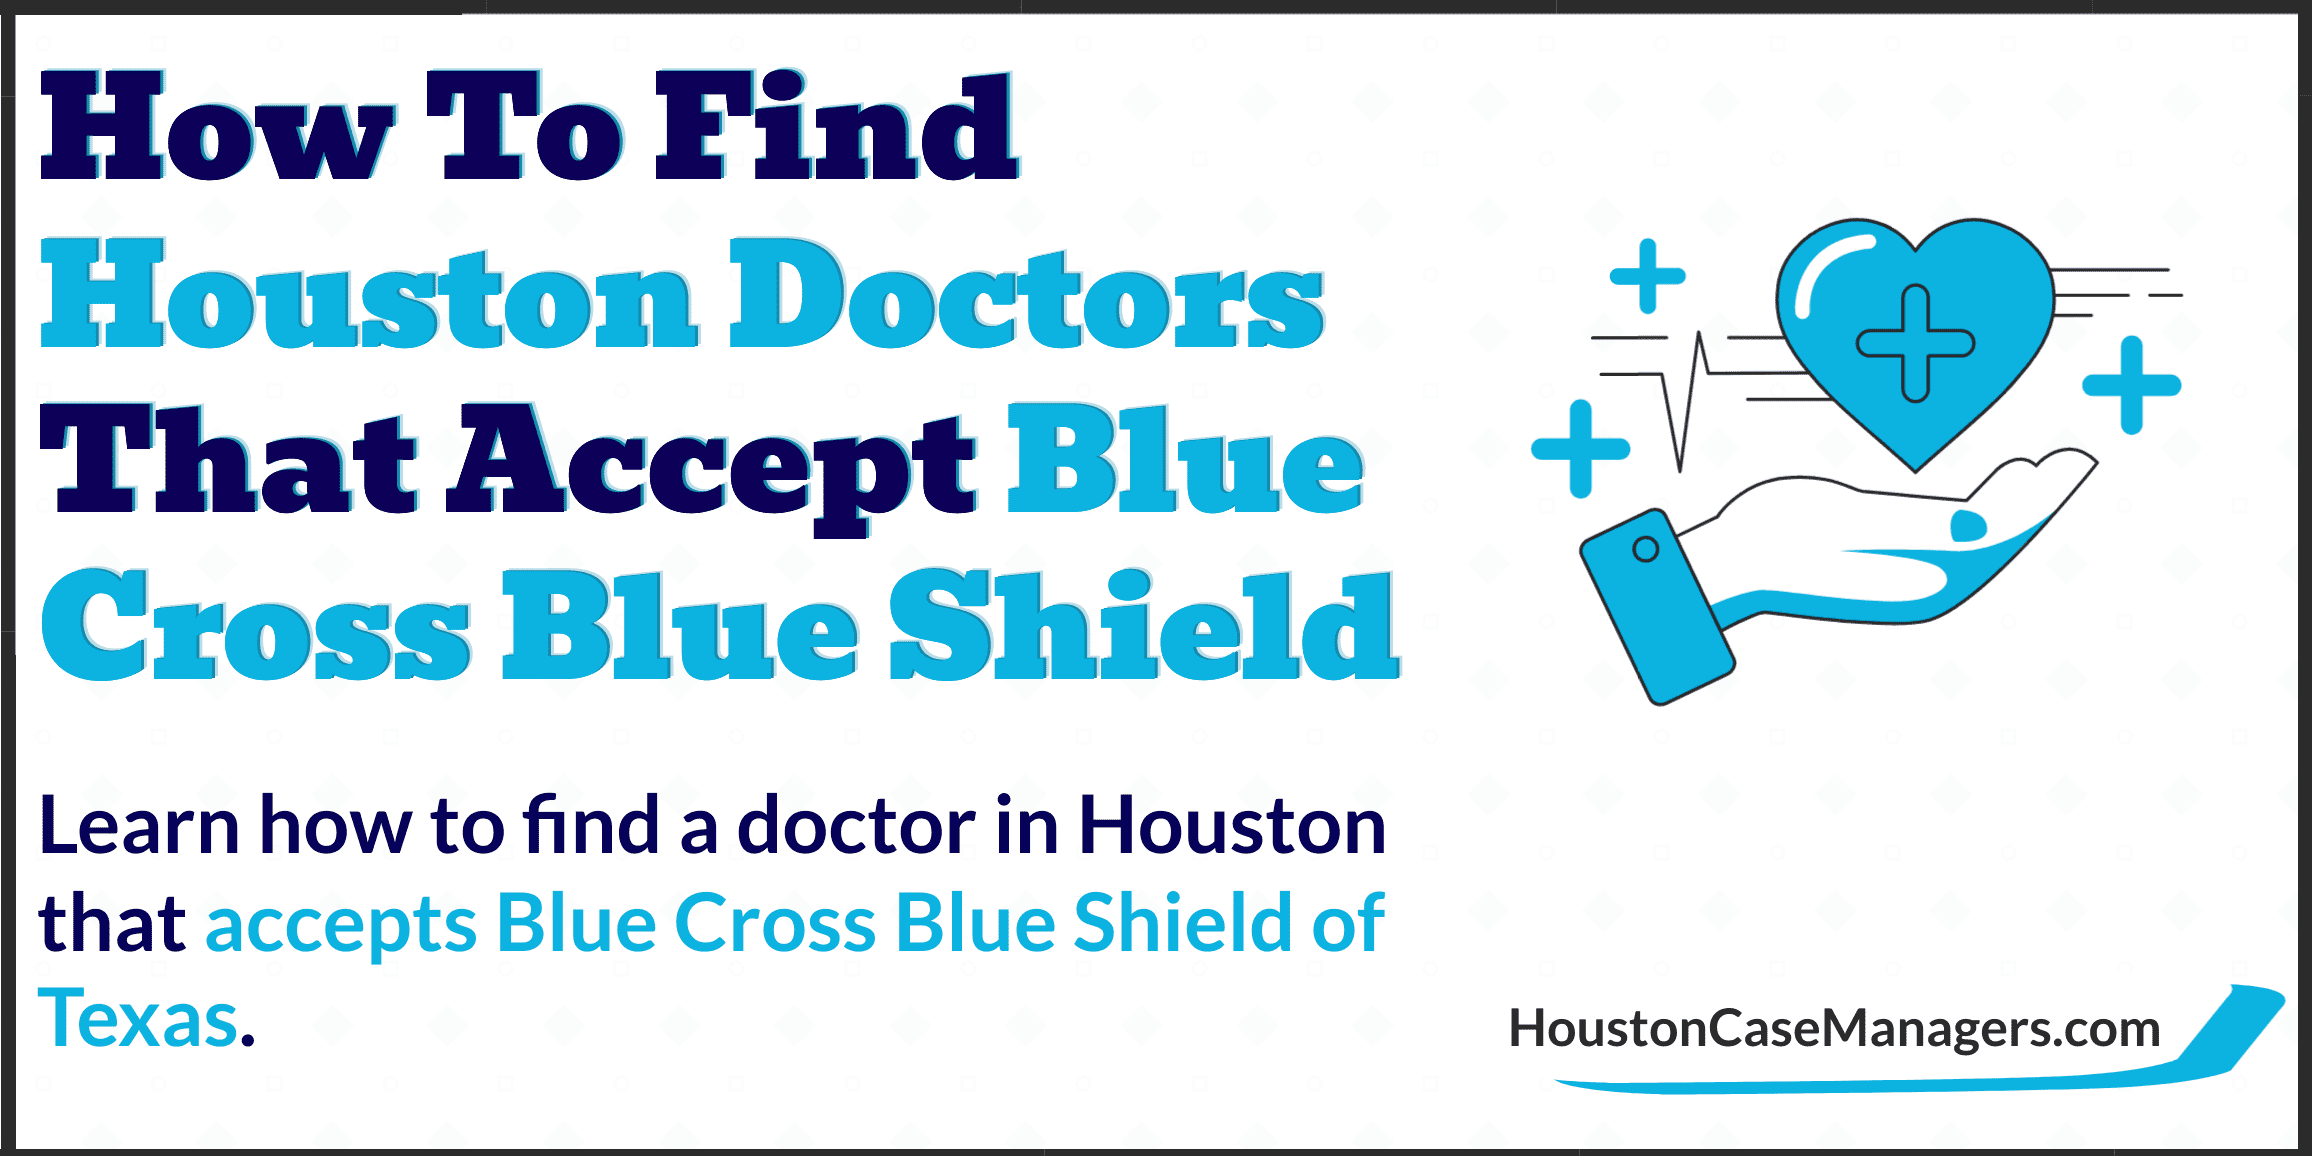 How To Find Houston Doctors That Accept Blue Cross Blue Shield